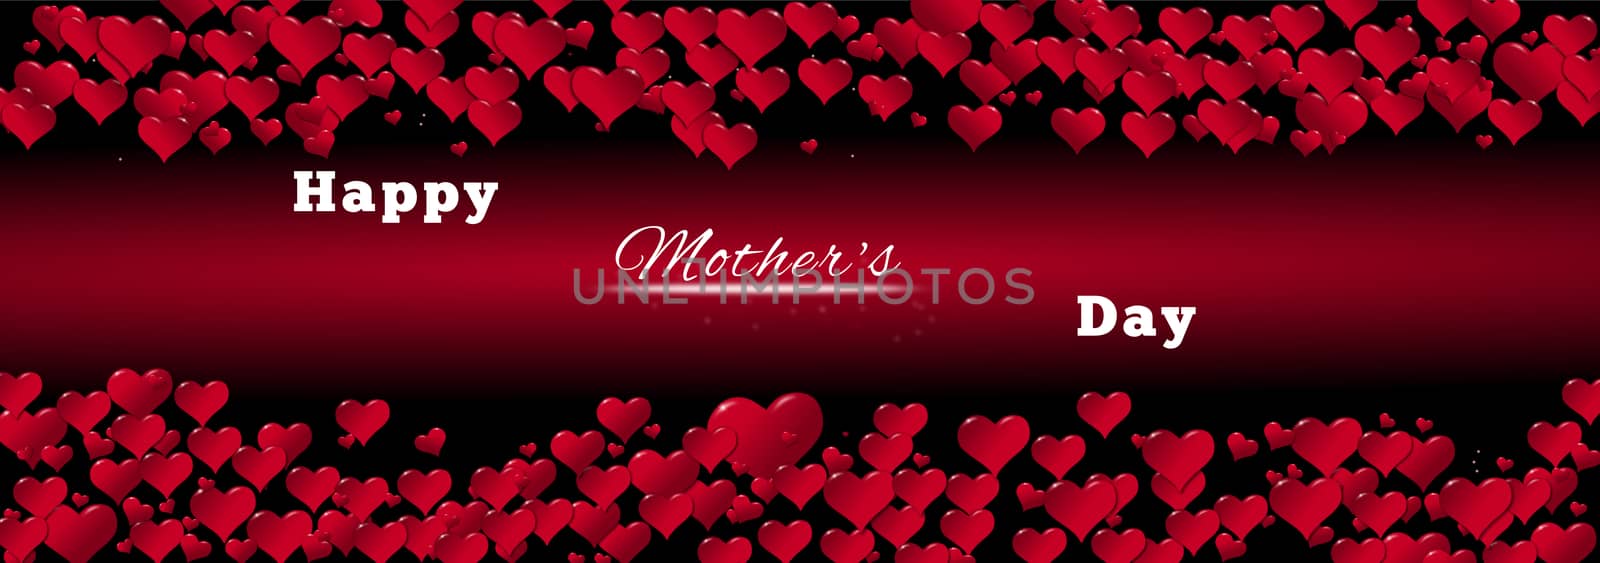 Banner of hearts for a Mother's Day on a red background